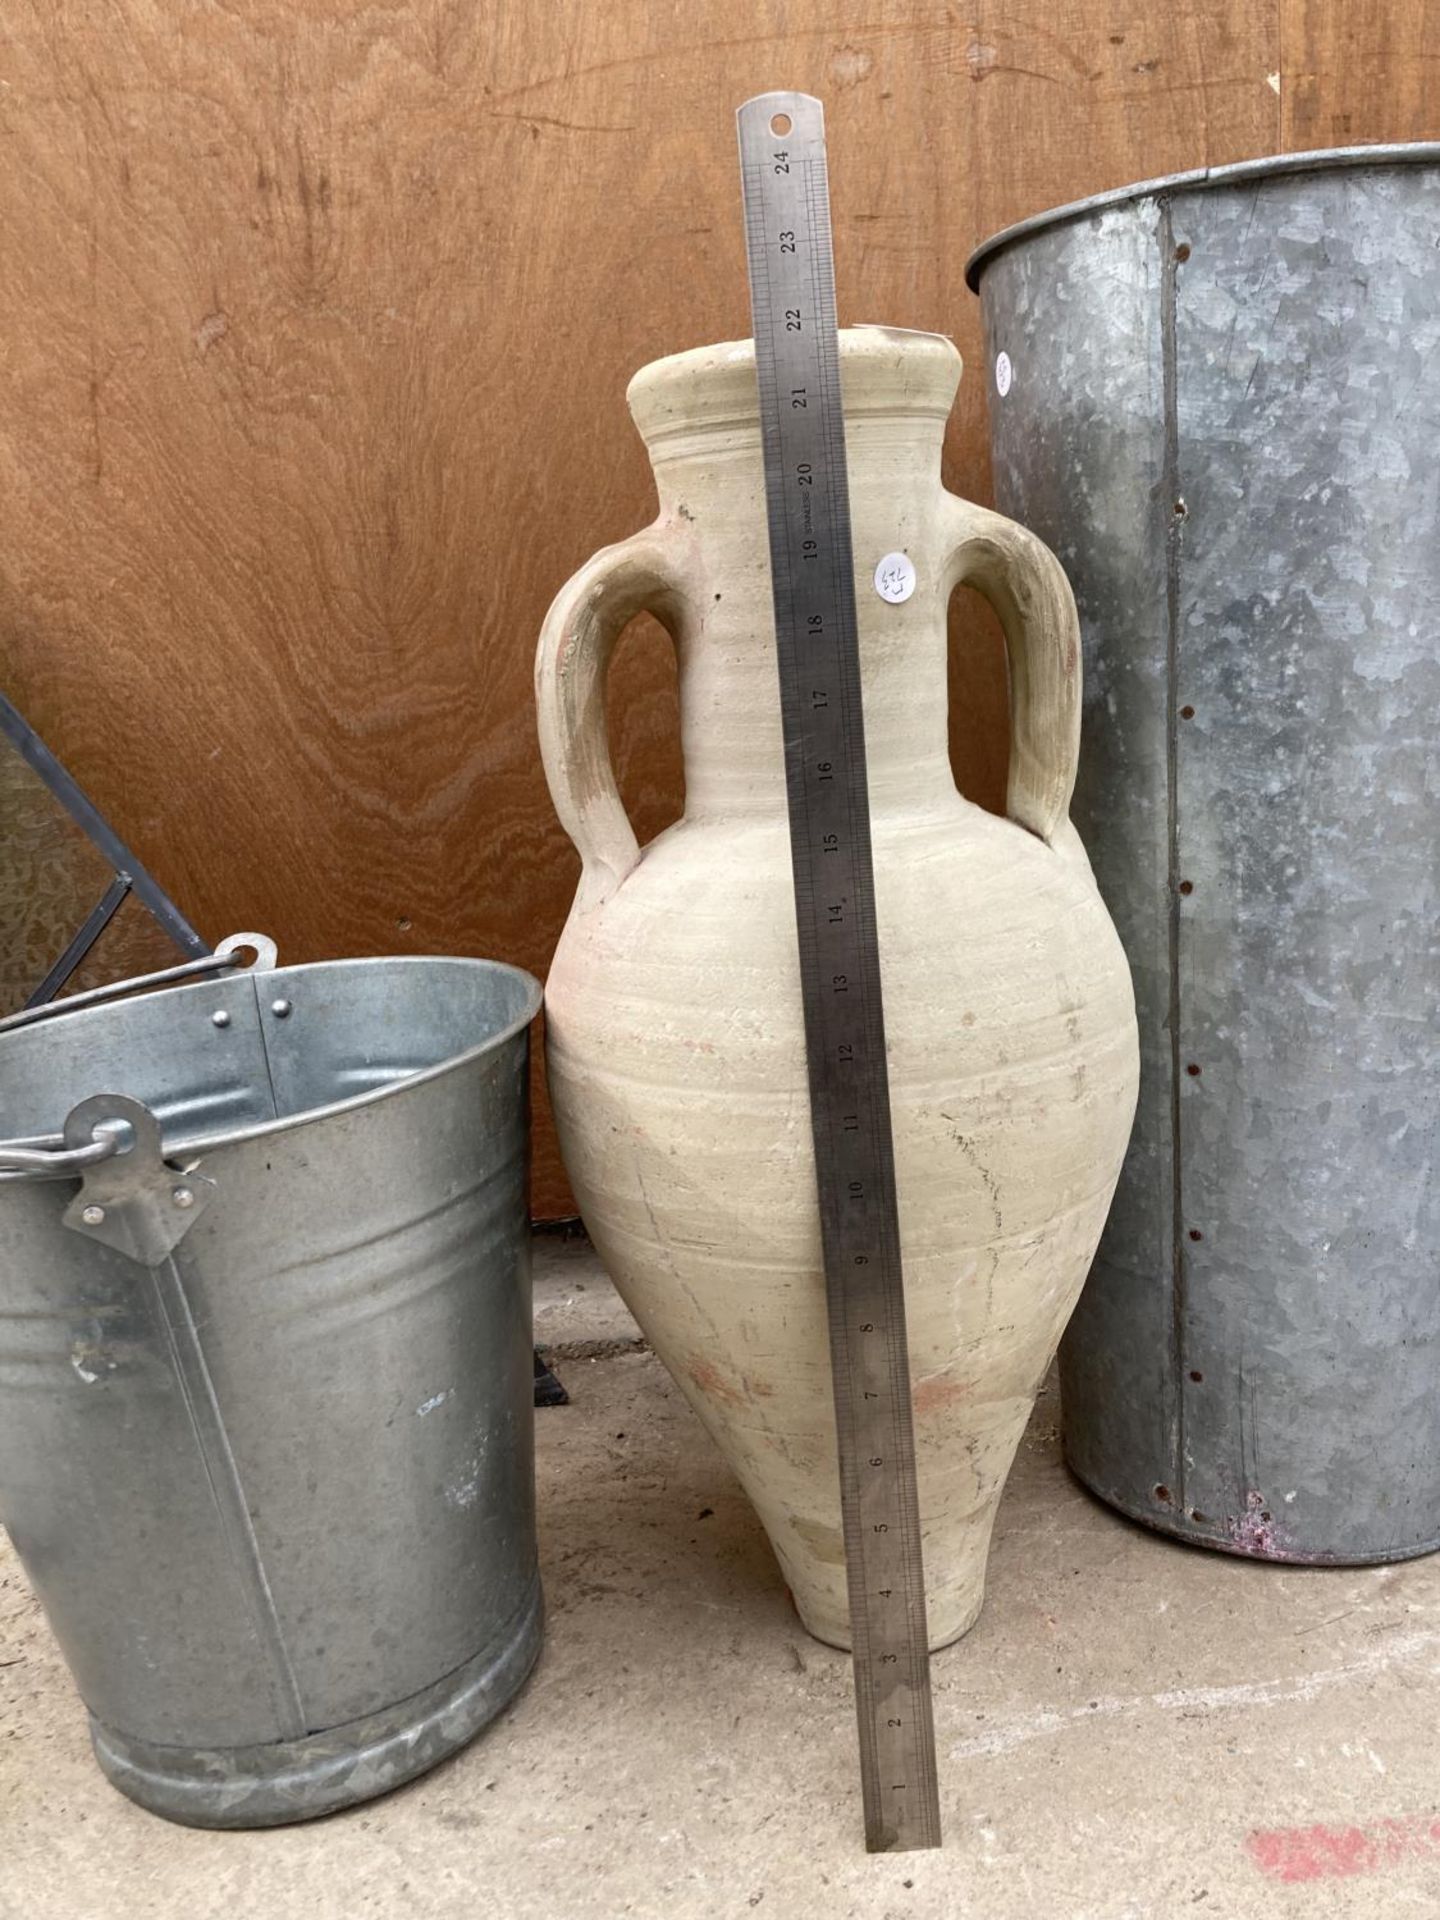 TWO GALAVANISED BUCKETS AND A CERAMIC URN VASE - Image 5 of 10